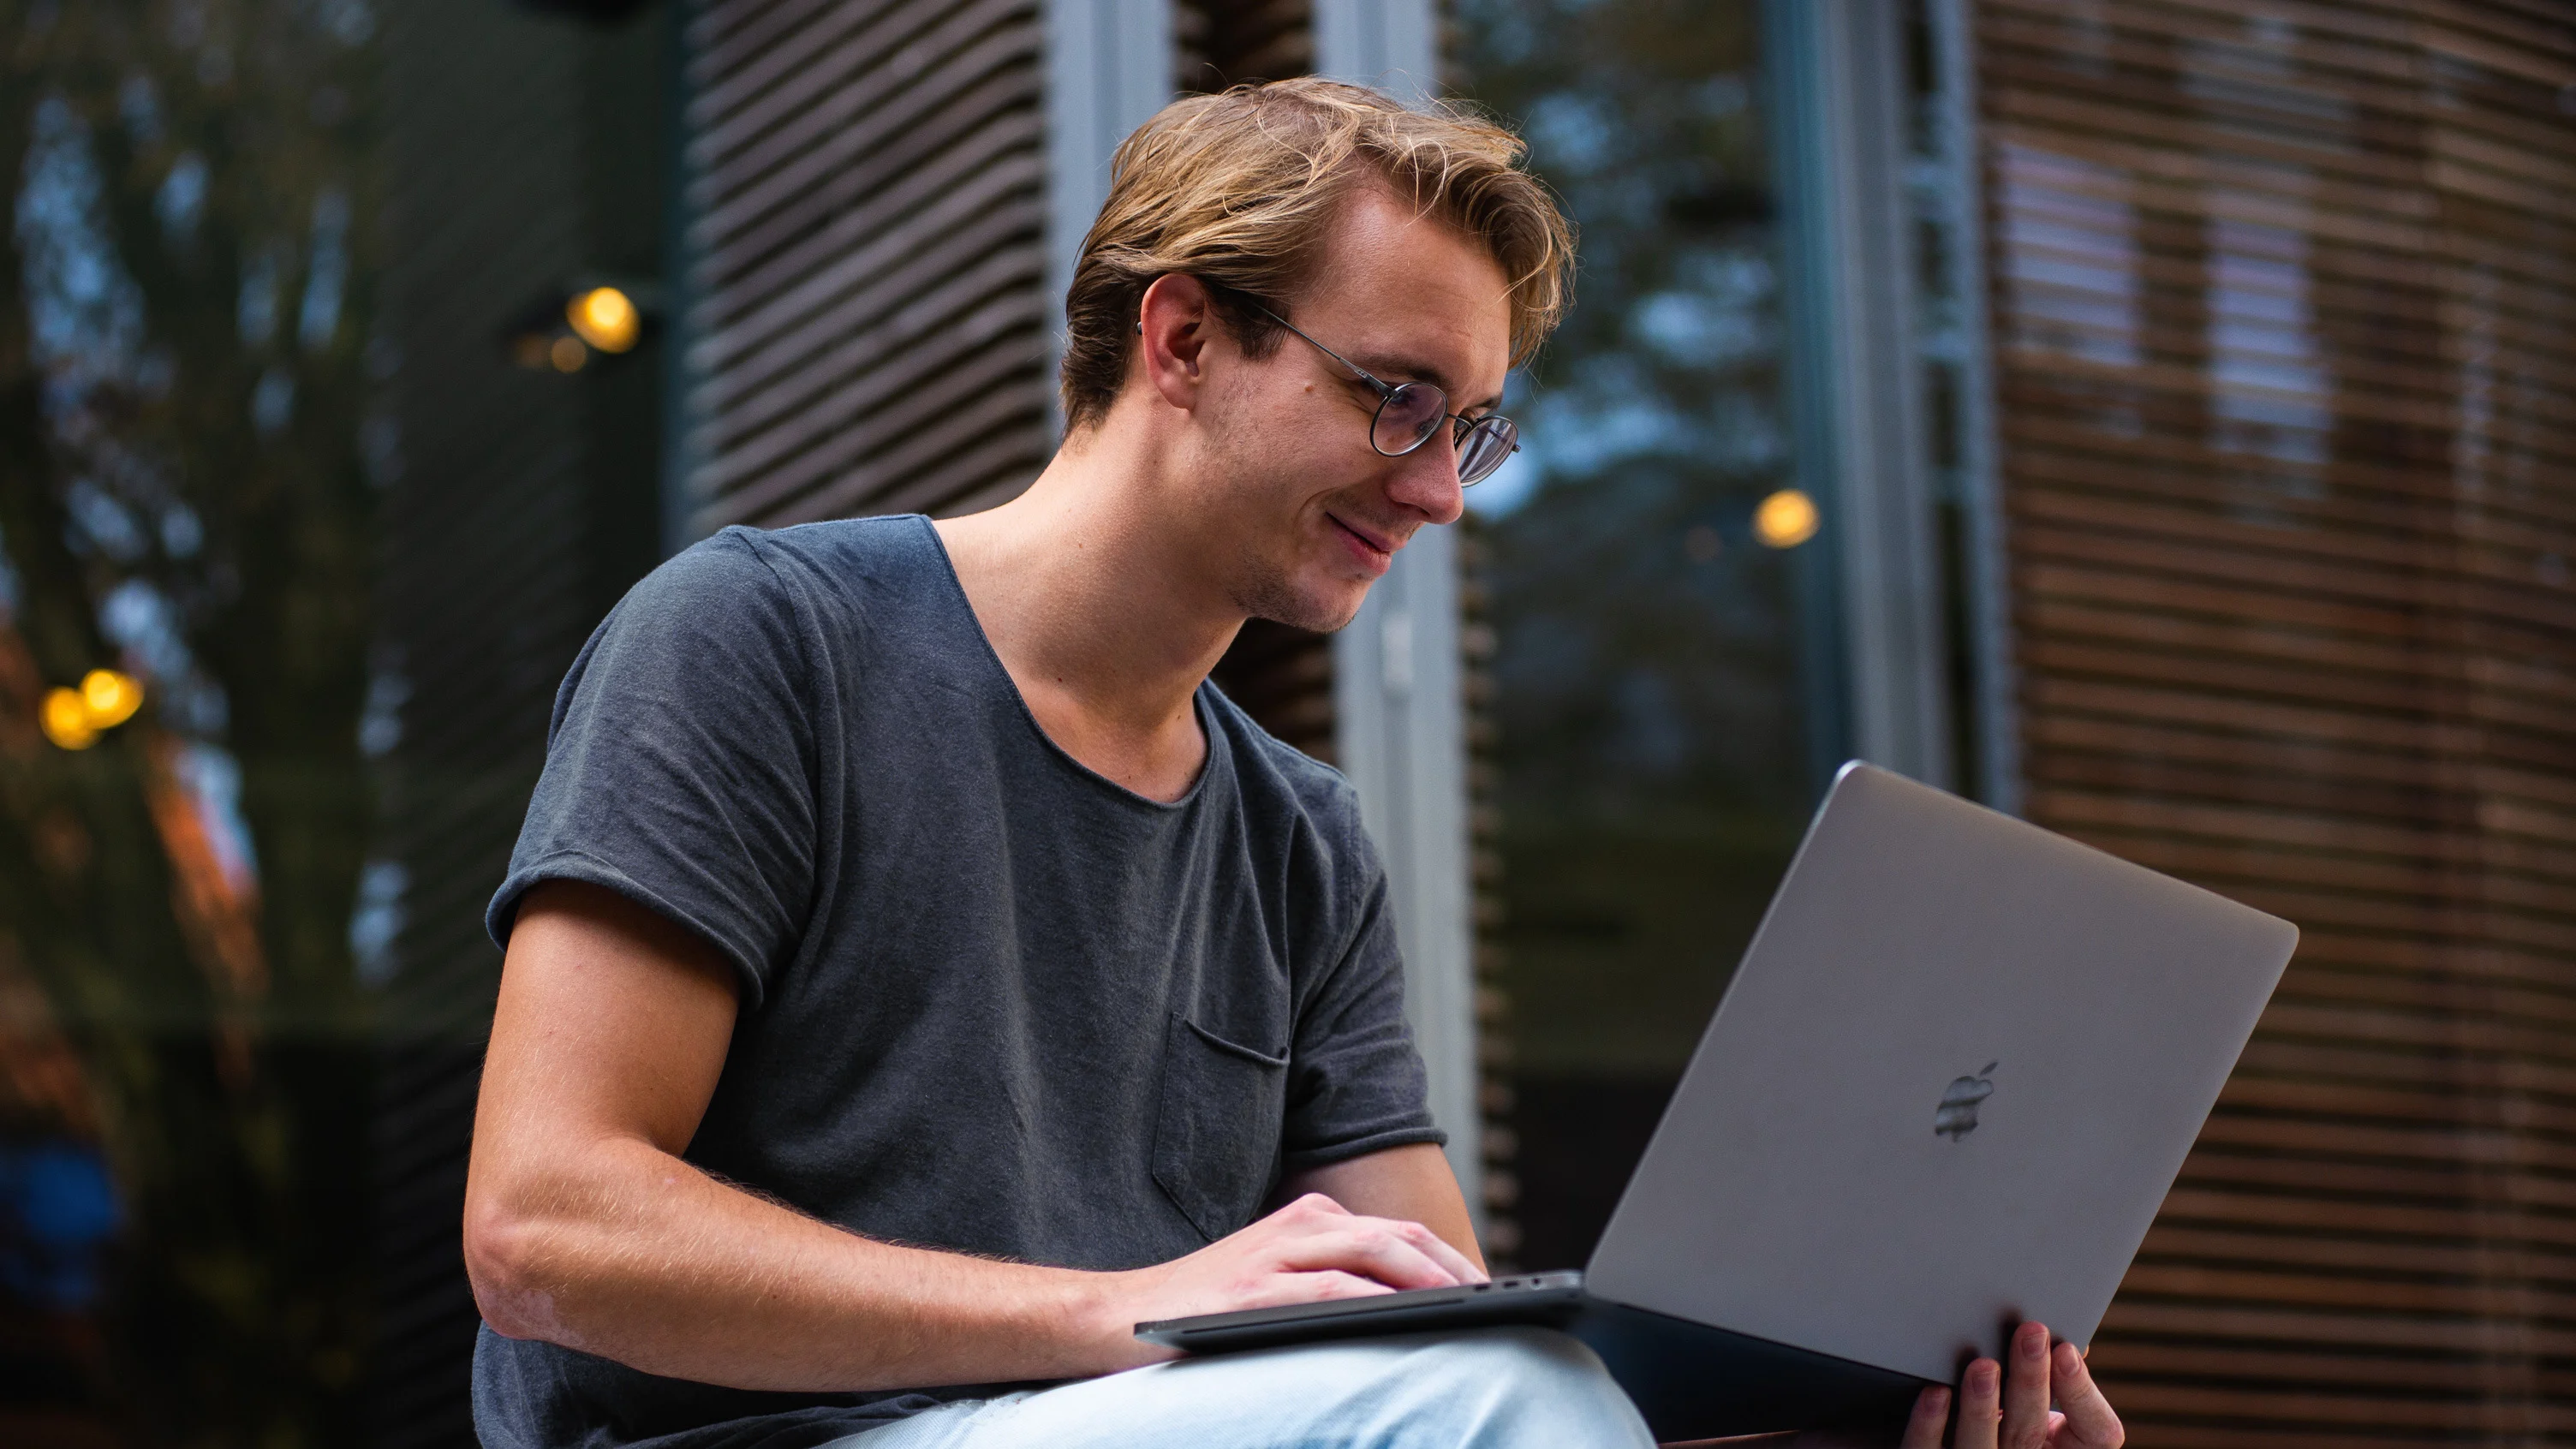 Young smiling man works on a laptop placed on his knees.